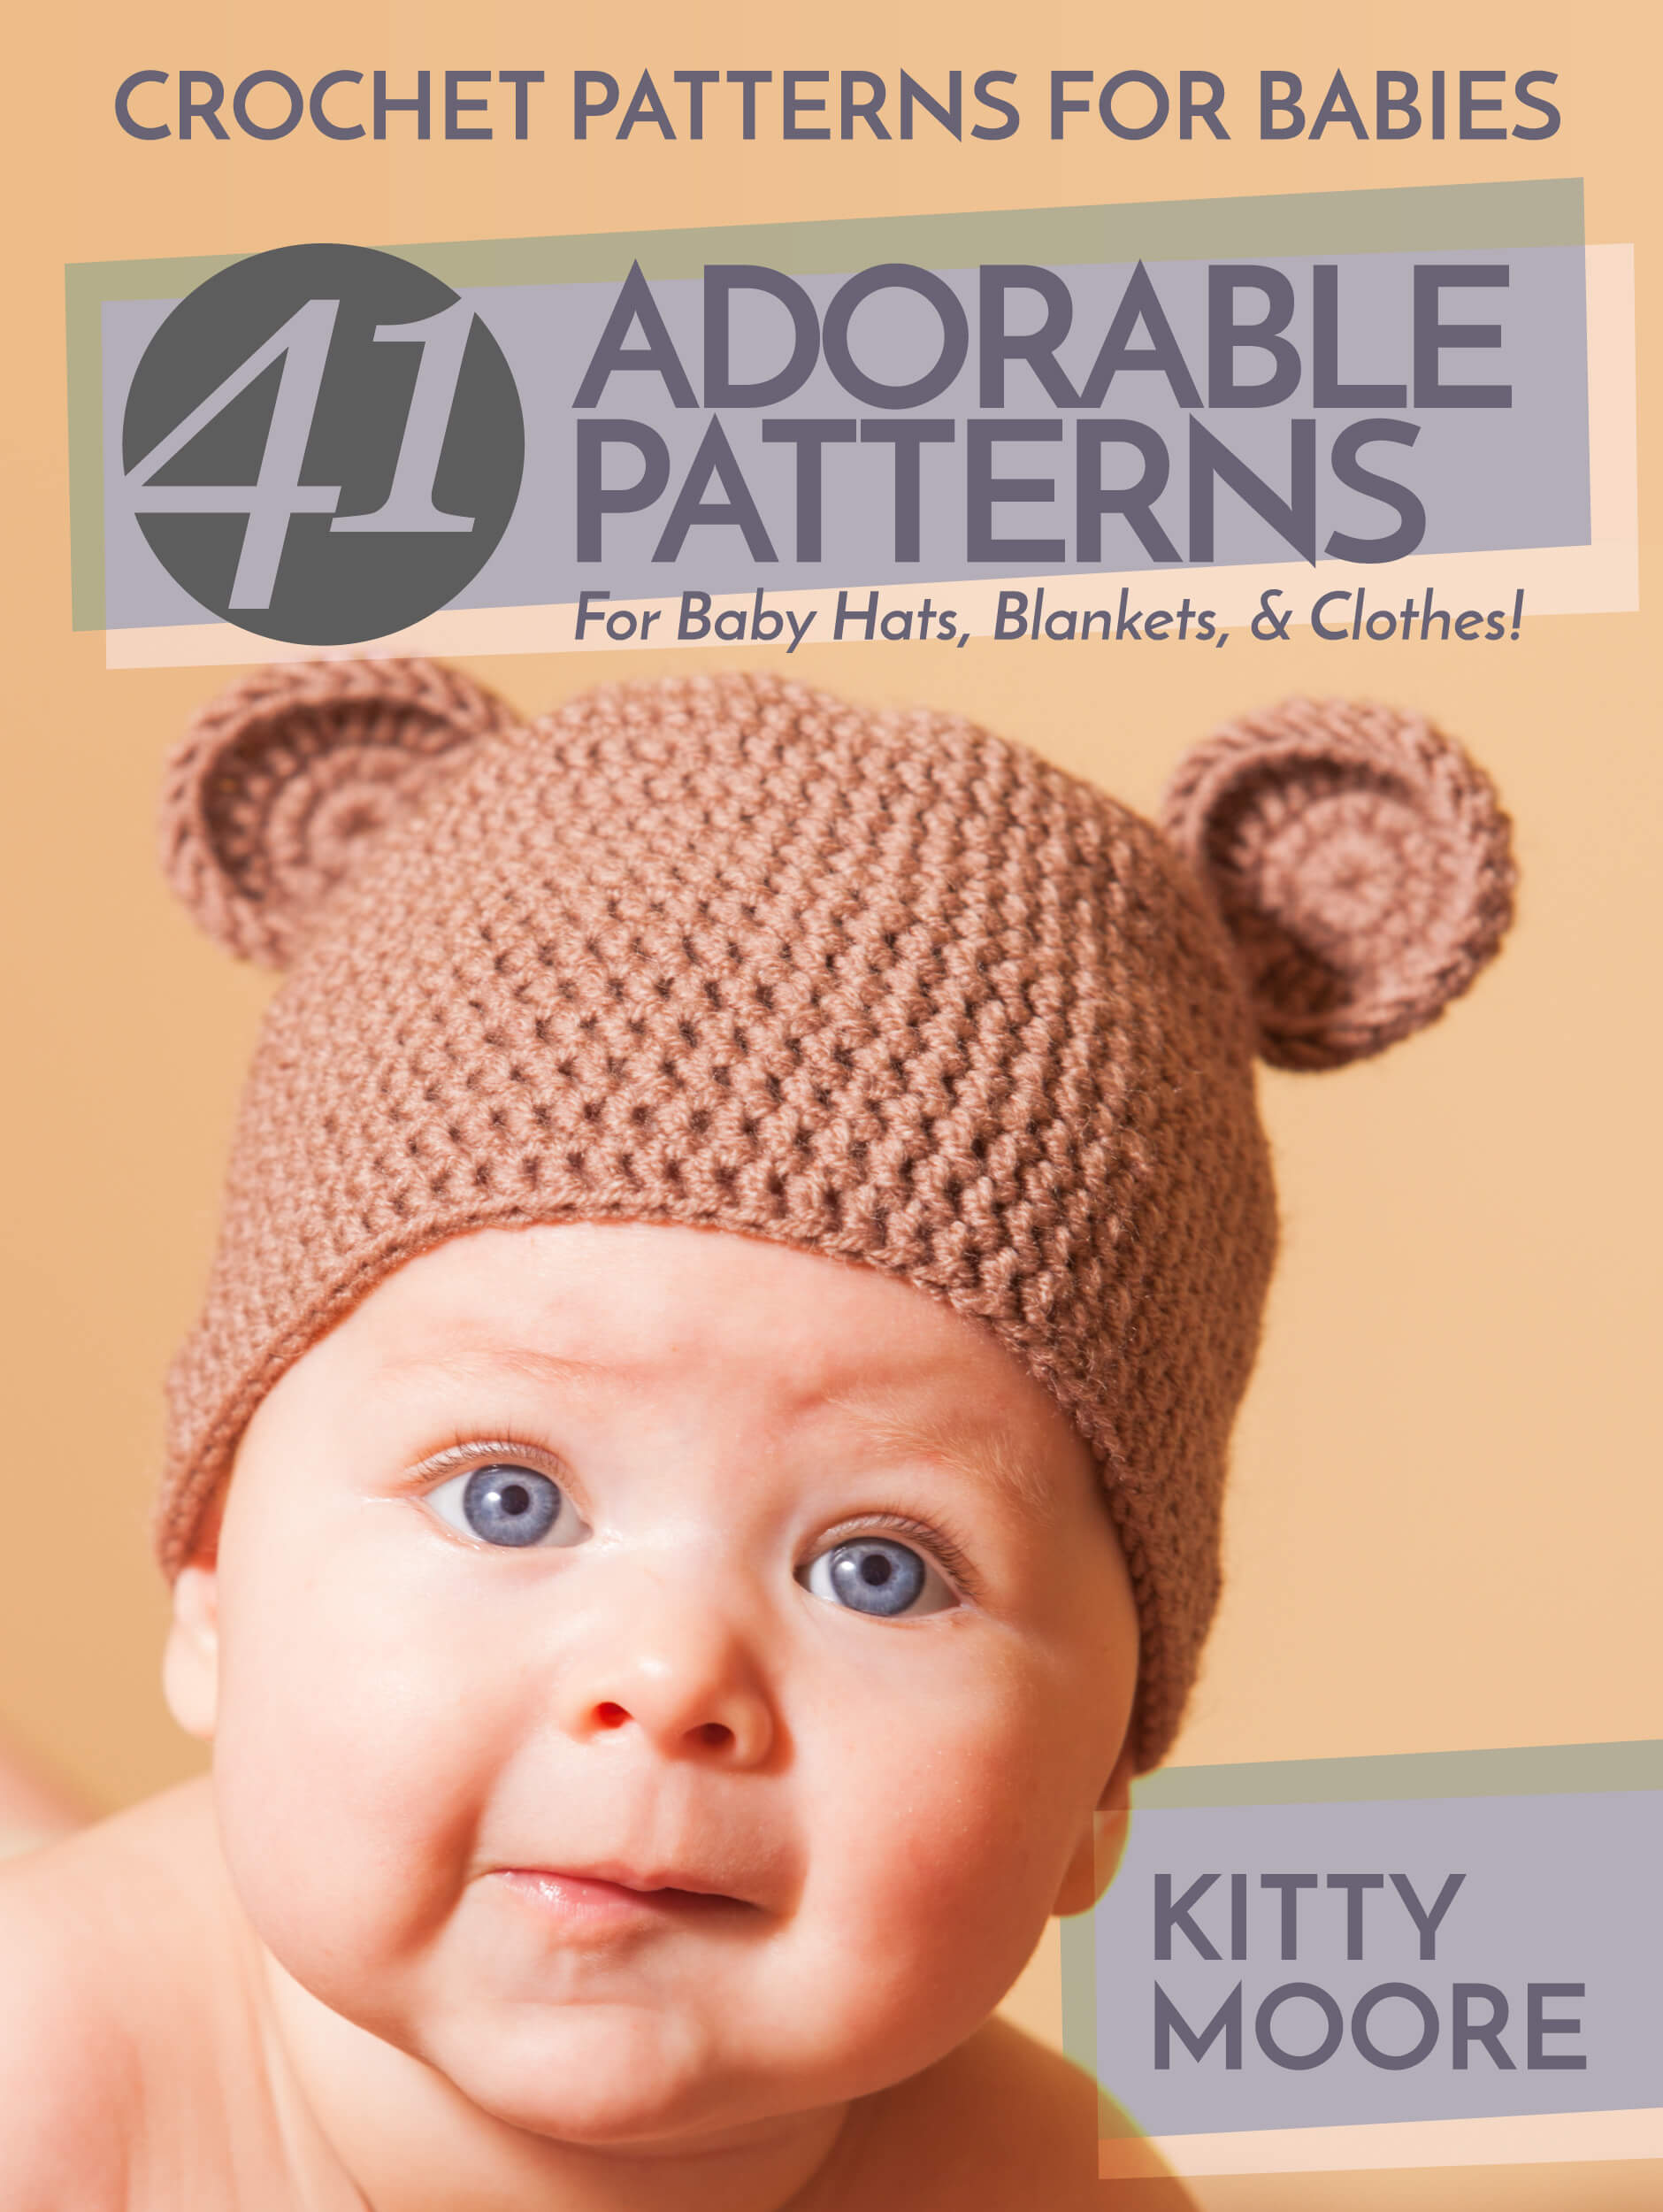 FREE: Crochet Patterns For Babies (2nd Edition): 41 Adorable Patterns For Baby Hats, Blankets, & Clothes! by Kitty Moore